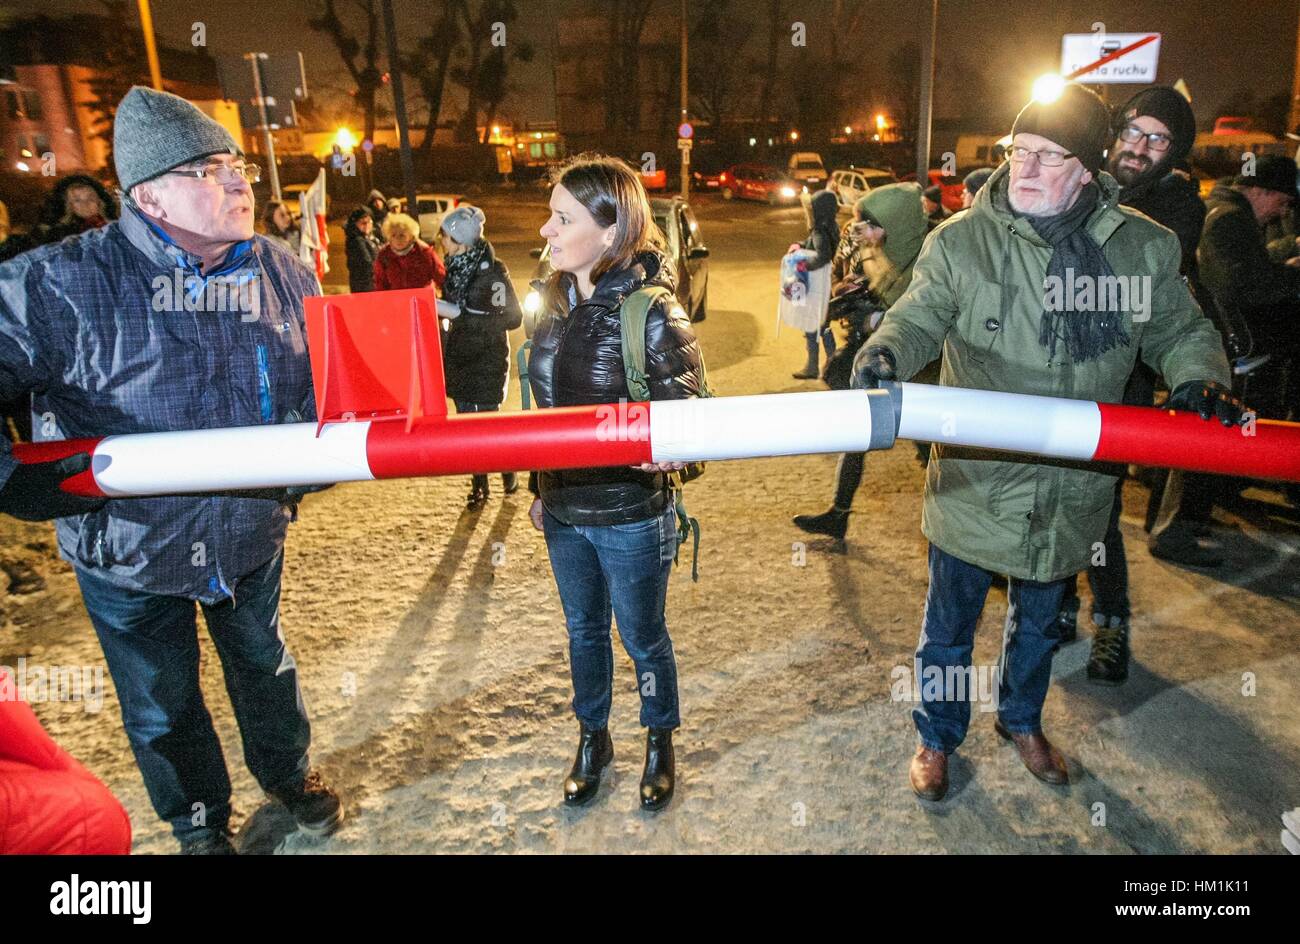 Gdansk, Poland. 31st Jan, 2017. Agnieszka Pomaska (C) Polish parliament member and Lech Kosiak (R) holding symbolic border barrier are seen outside the Second World War Museum on 31 January 2017 in Gdansk, Poland. Protest was organized by KOD movement against Poland's nationalist government plans to reshape the Museum's permanent exhibition into a display more focused on Poland's experience of the conflict. Museum is expected to open to the public on February 2017, is to place the war in broader international context. Credit: Michal Fludra/Alamy Live News Stock Photo